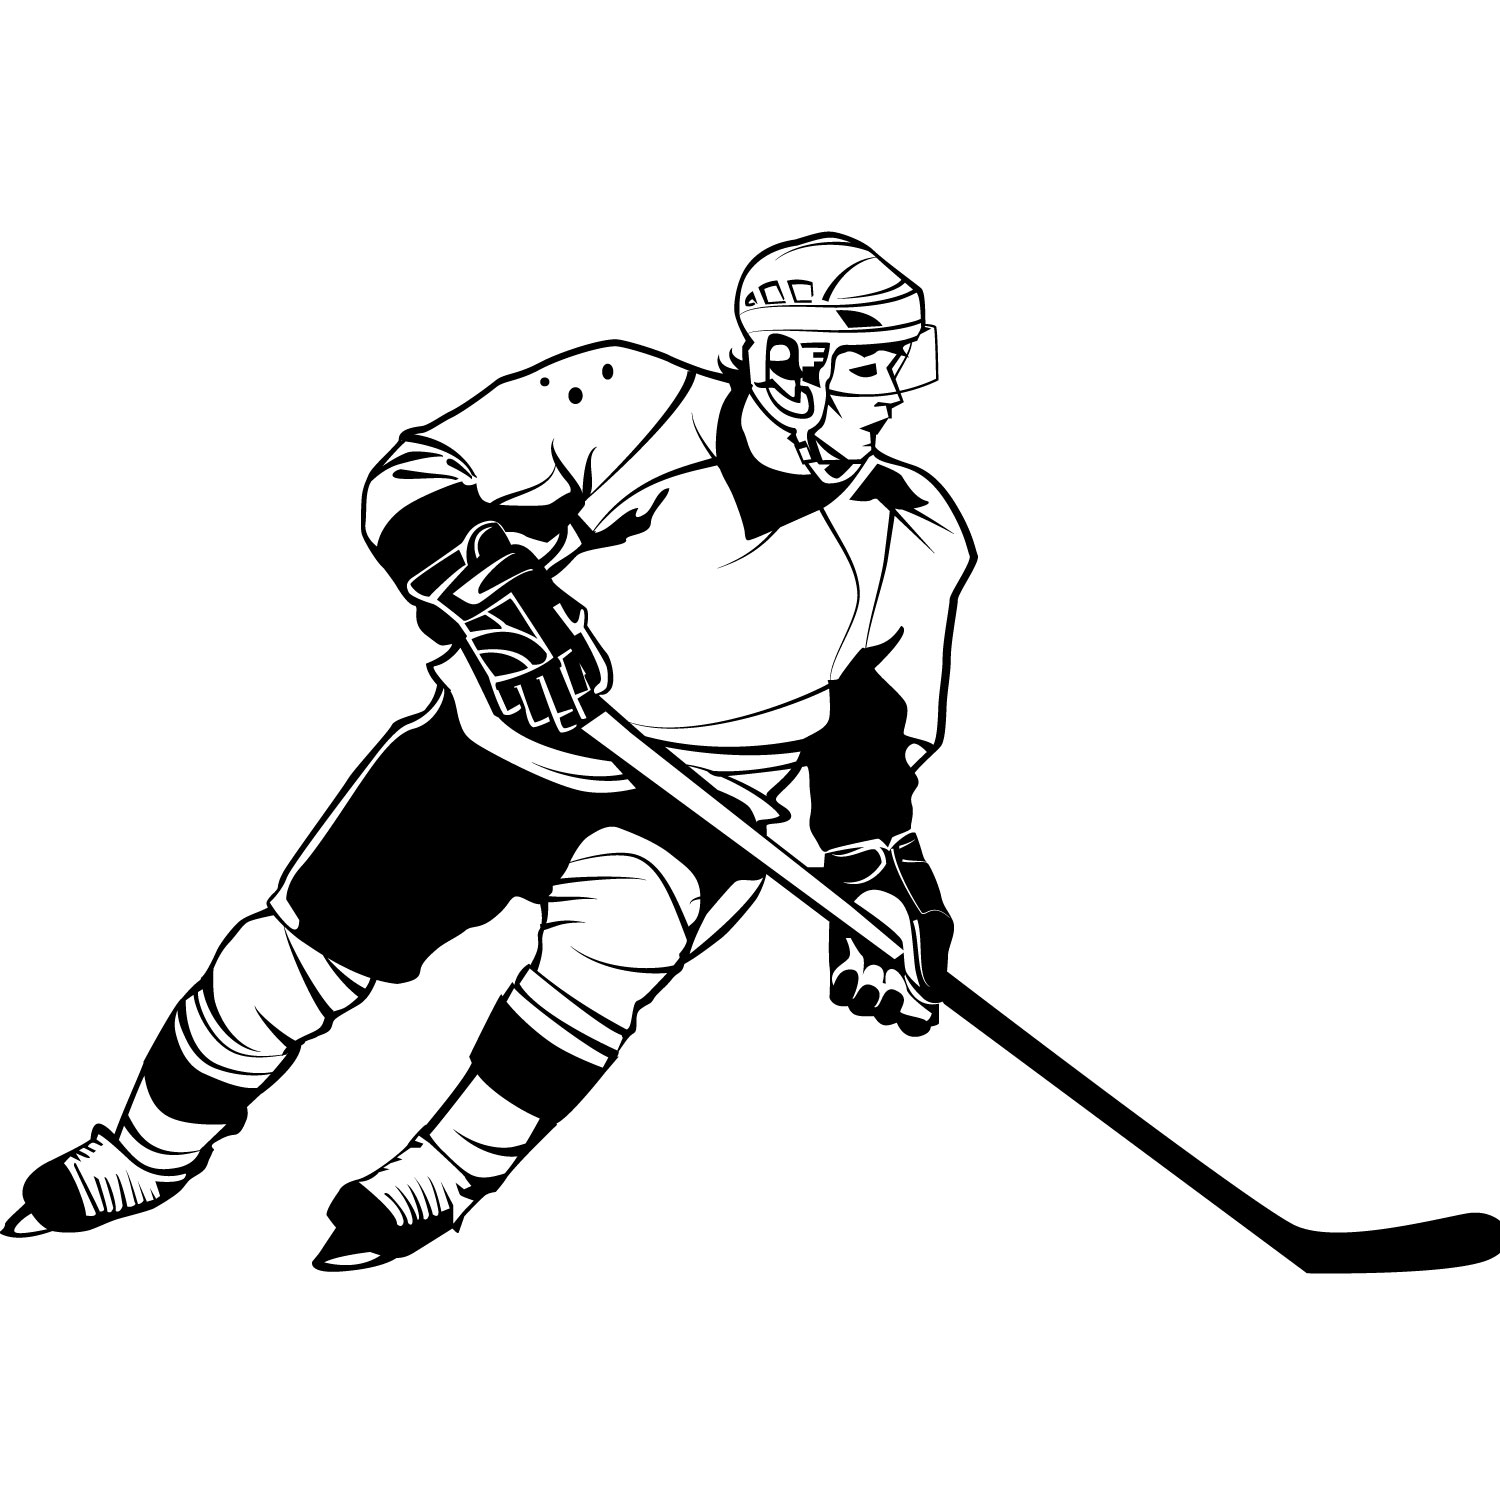 hockey player clipart Archives - Clip Art Pin